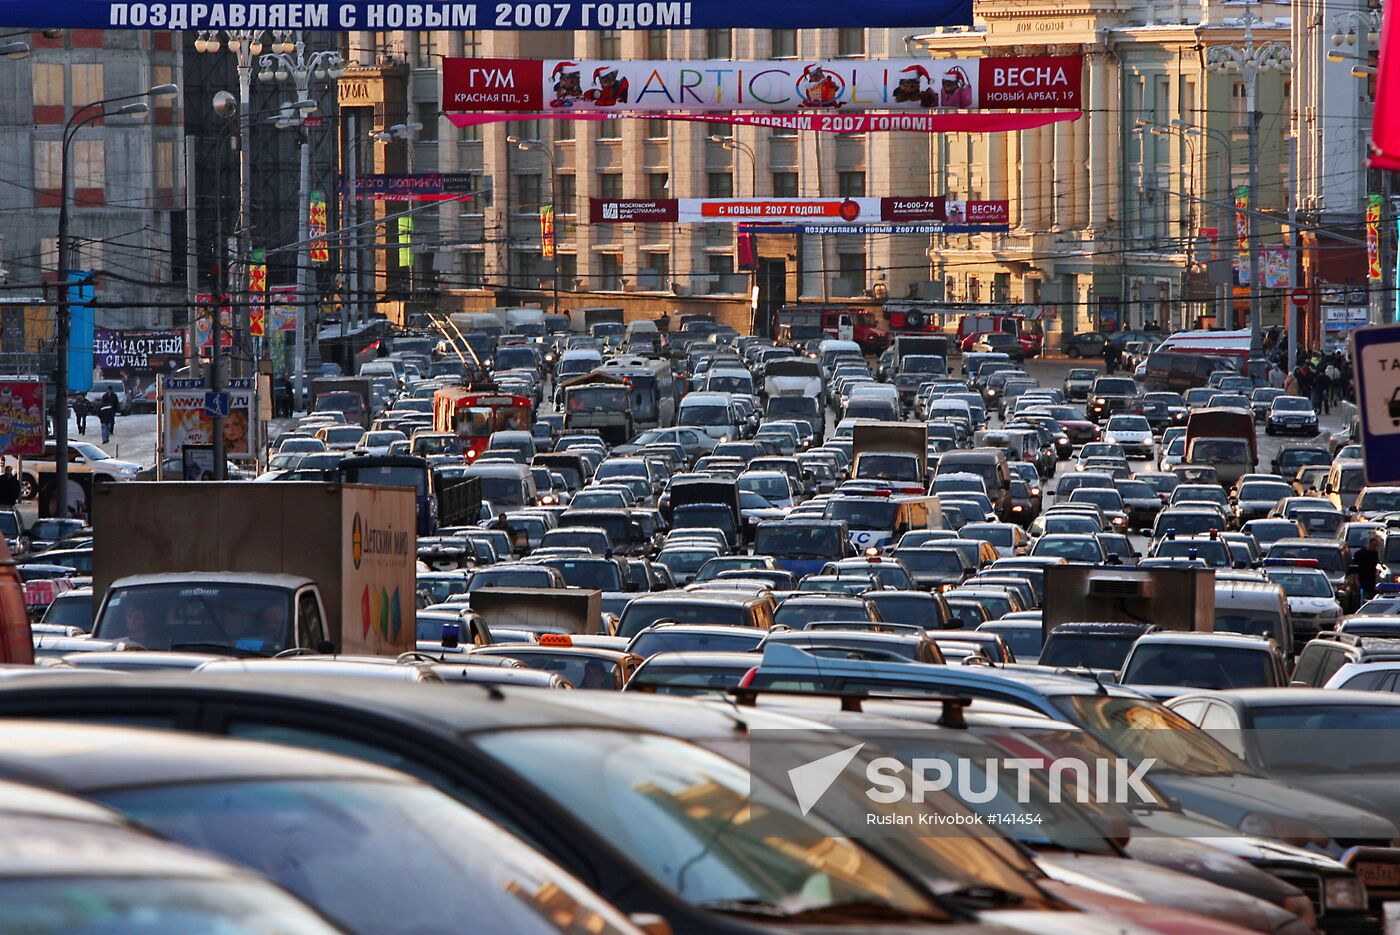 TRAFFIC JAM MOSCOW